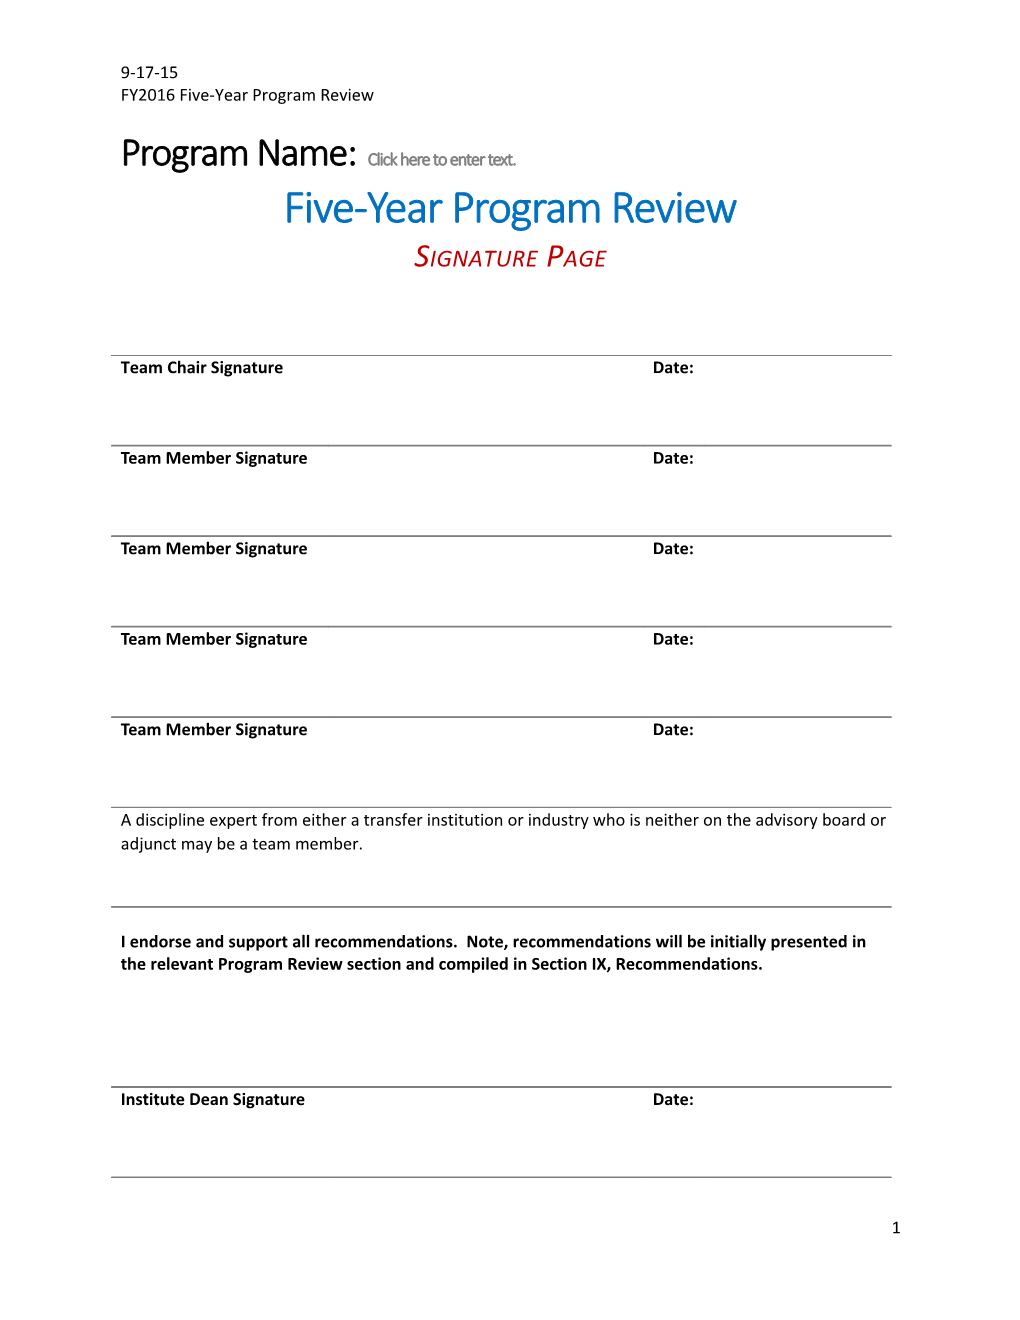 FY2016 Five-Year Program Review